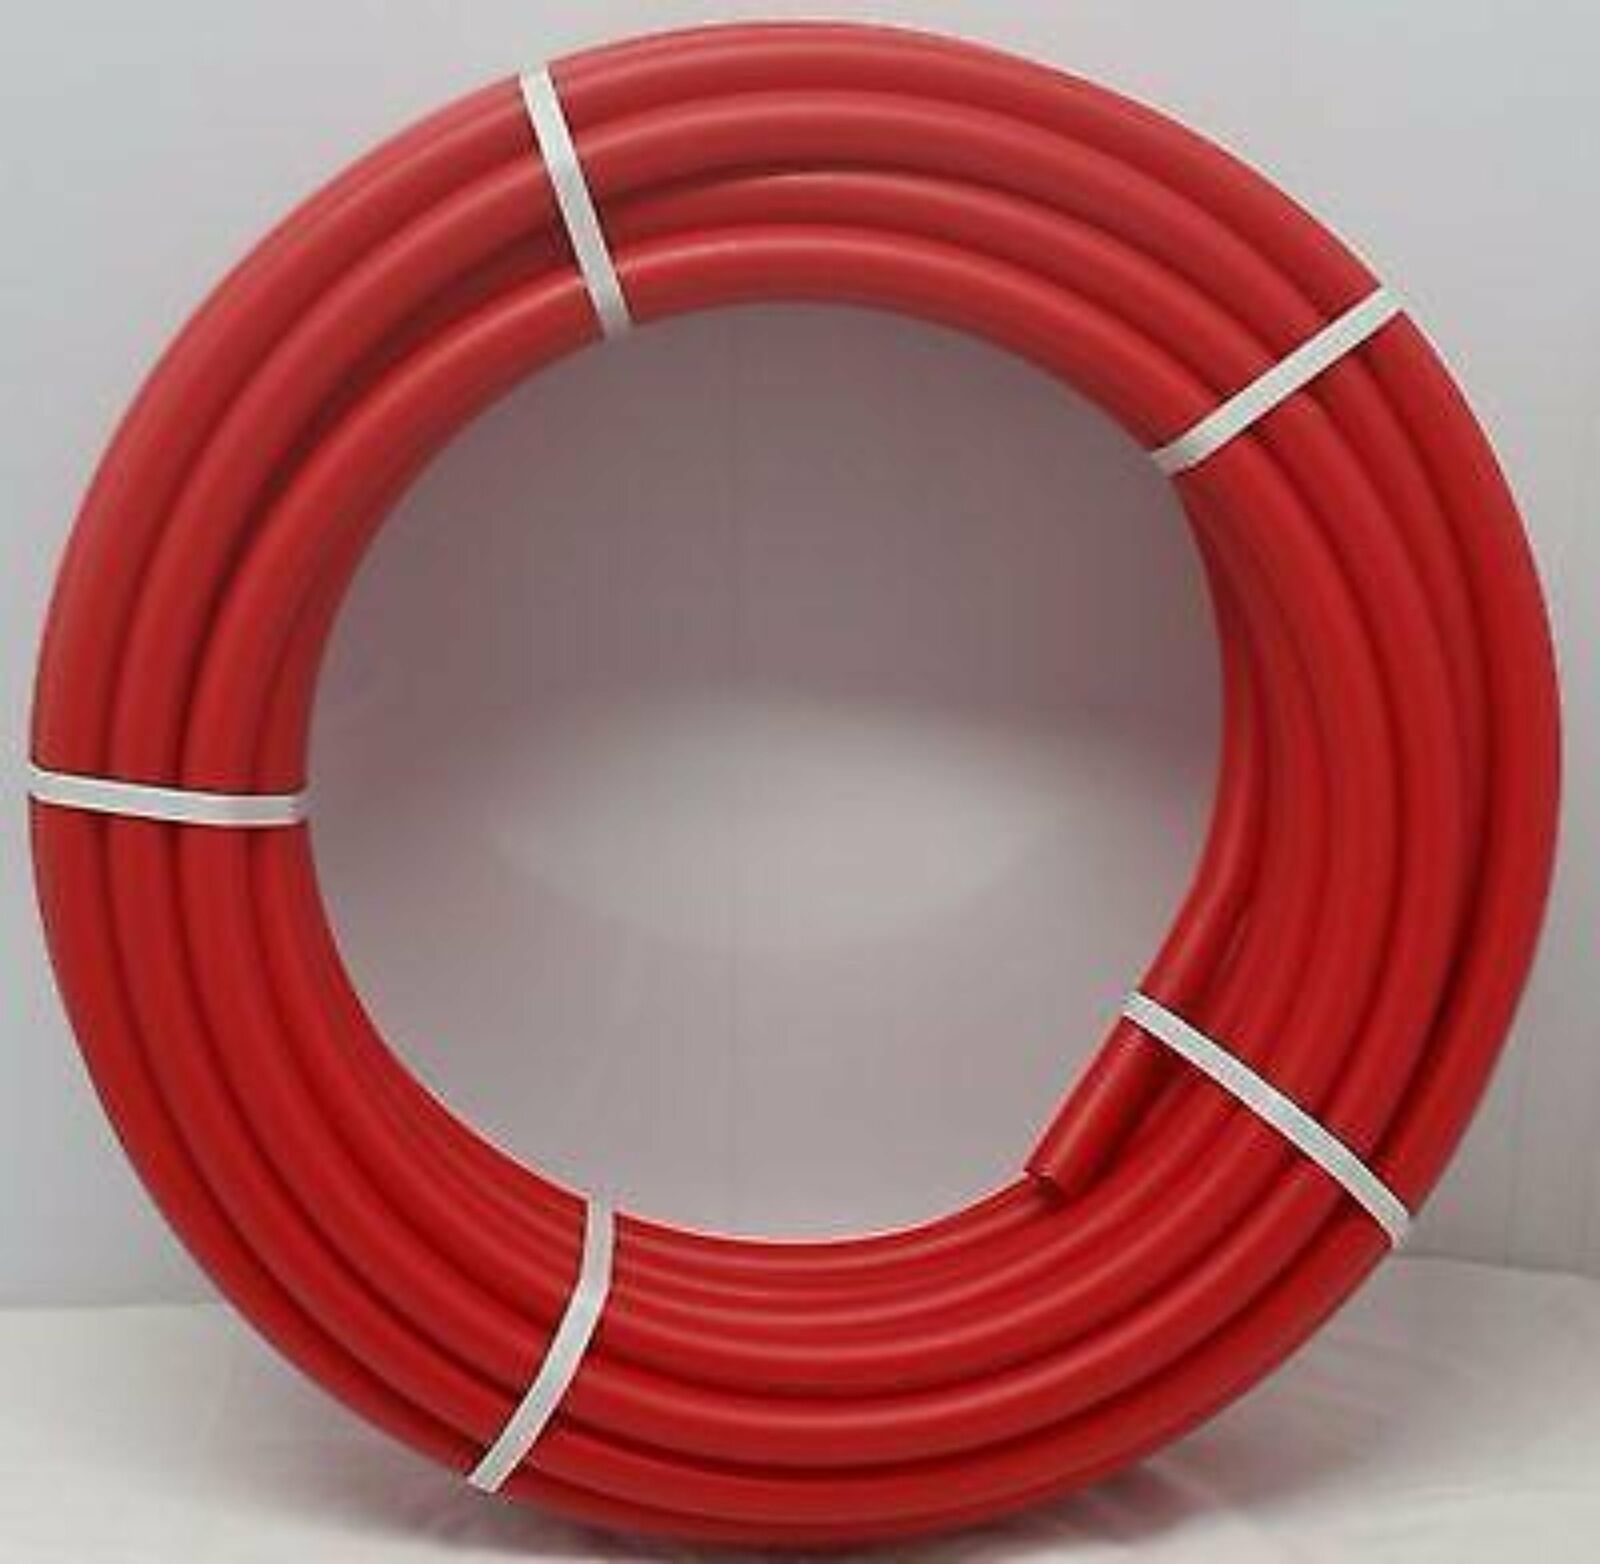 1' - 1000' coil - RED Certified Non-Barrier PEX B Tubing Htg/PLbg/Potable Water